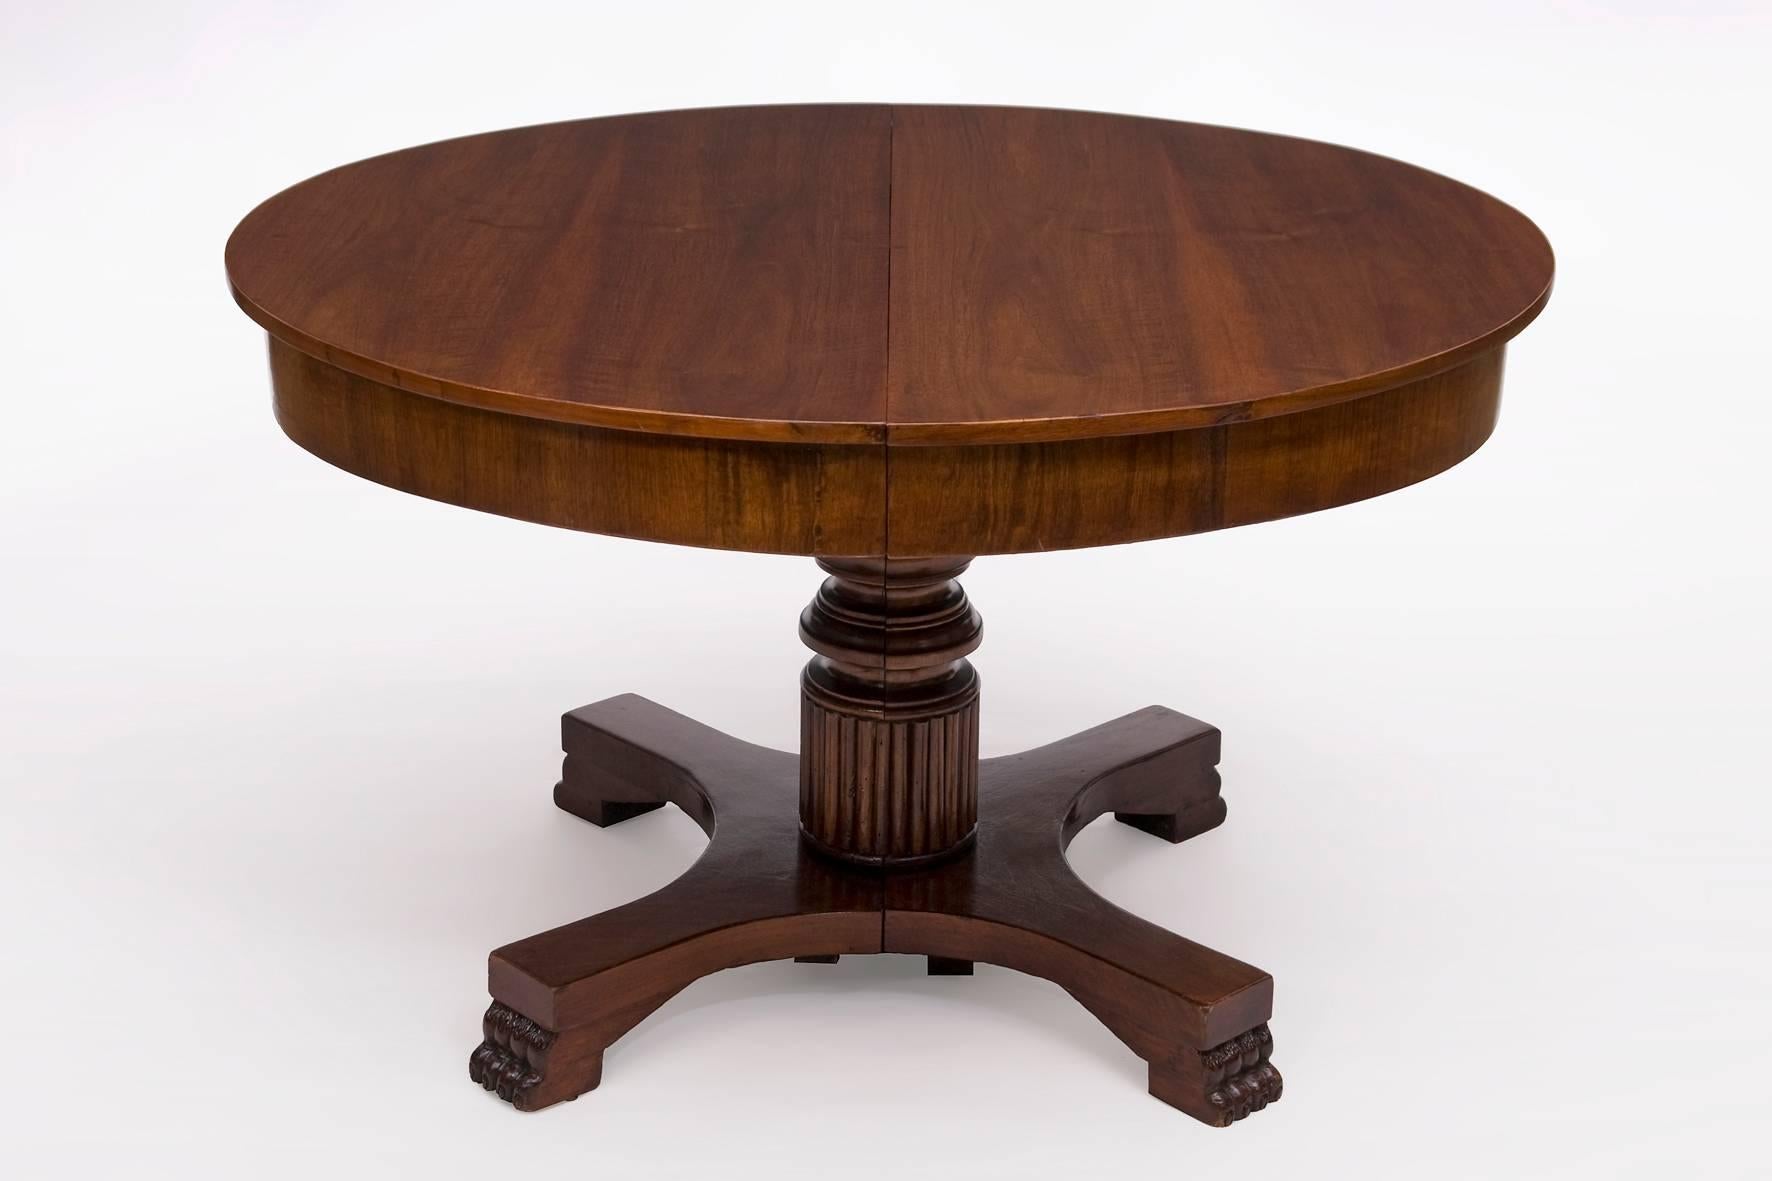 An antique Empire extension table standing on an quadruple middle foot with paw feet and with the top veneered in walnut. The foot is divisible in the middle. When the table is pulled apart, a hidden support leg reveals and supports the main foot